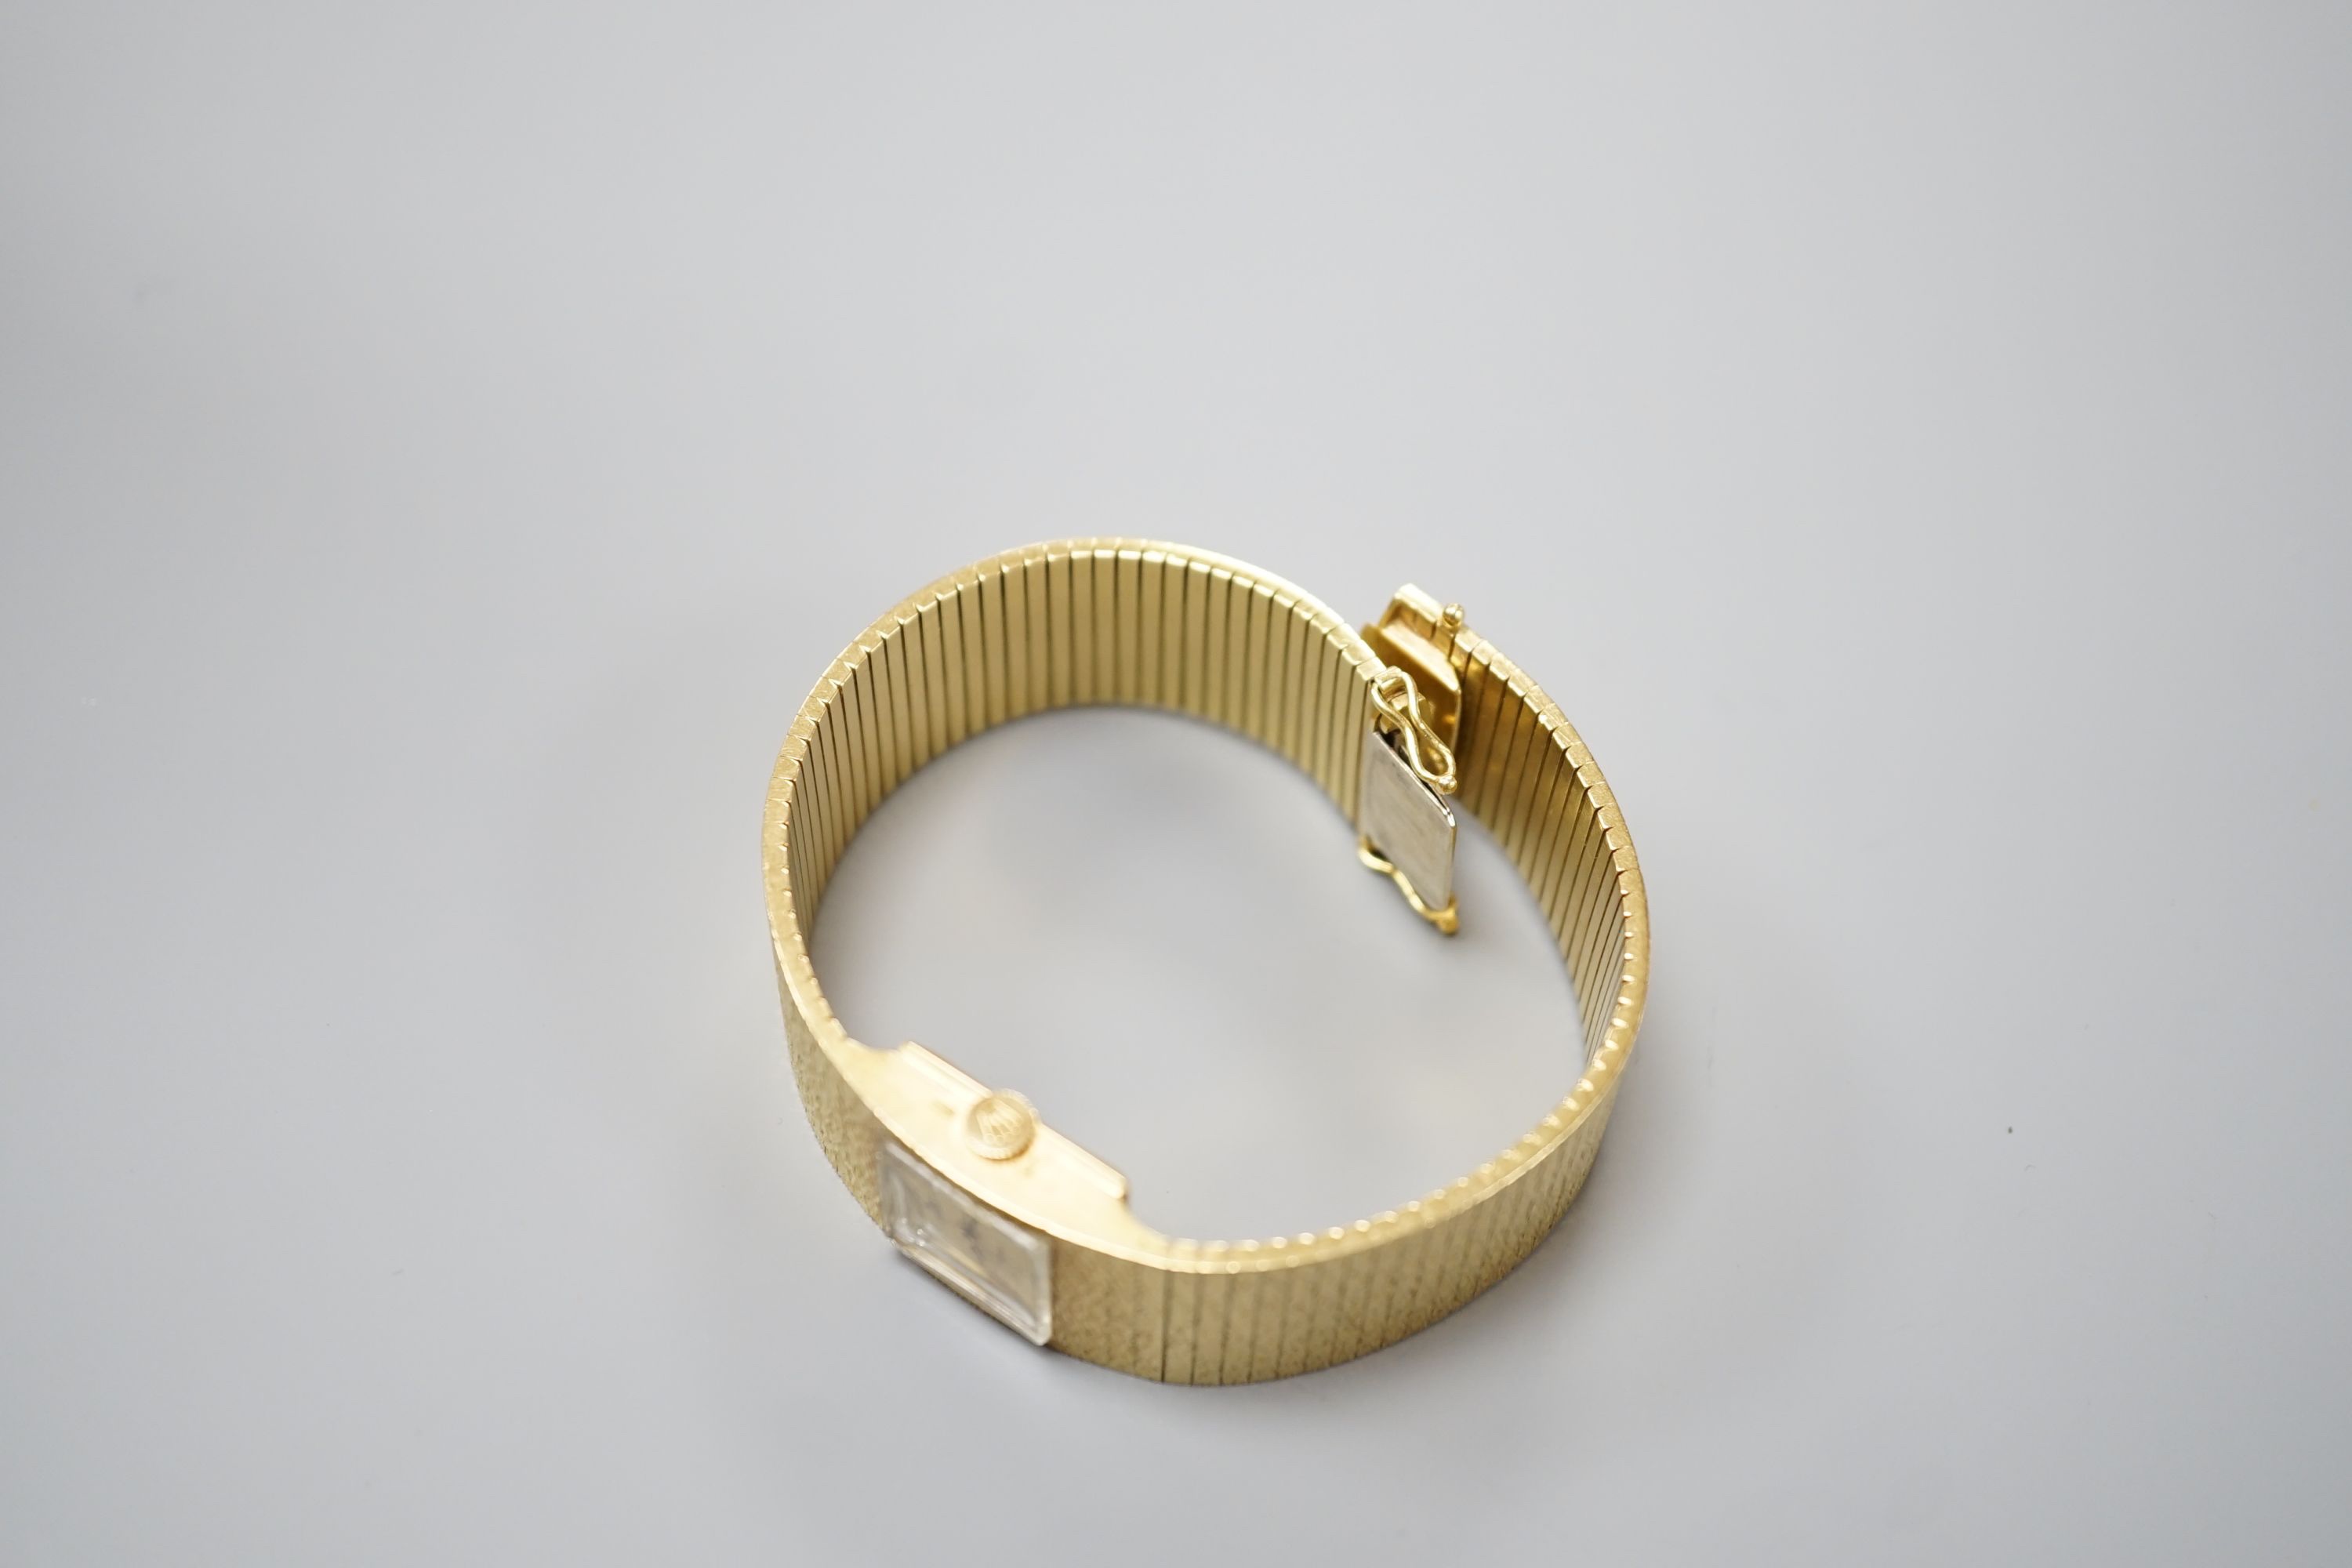 A lady's 1960's textured 18ct gold Rolex Precision manual wind bracelet watch, case diameter 17mm, - Image 4 of 5